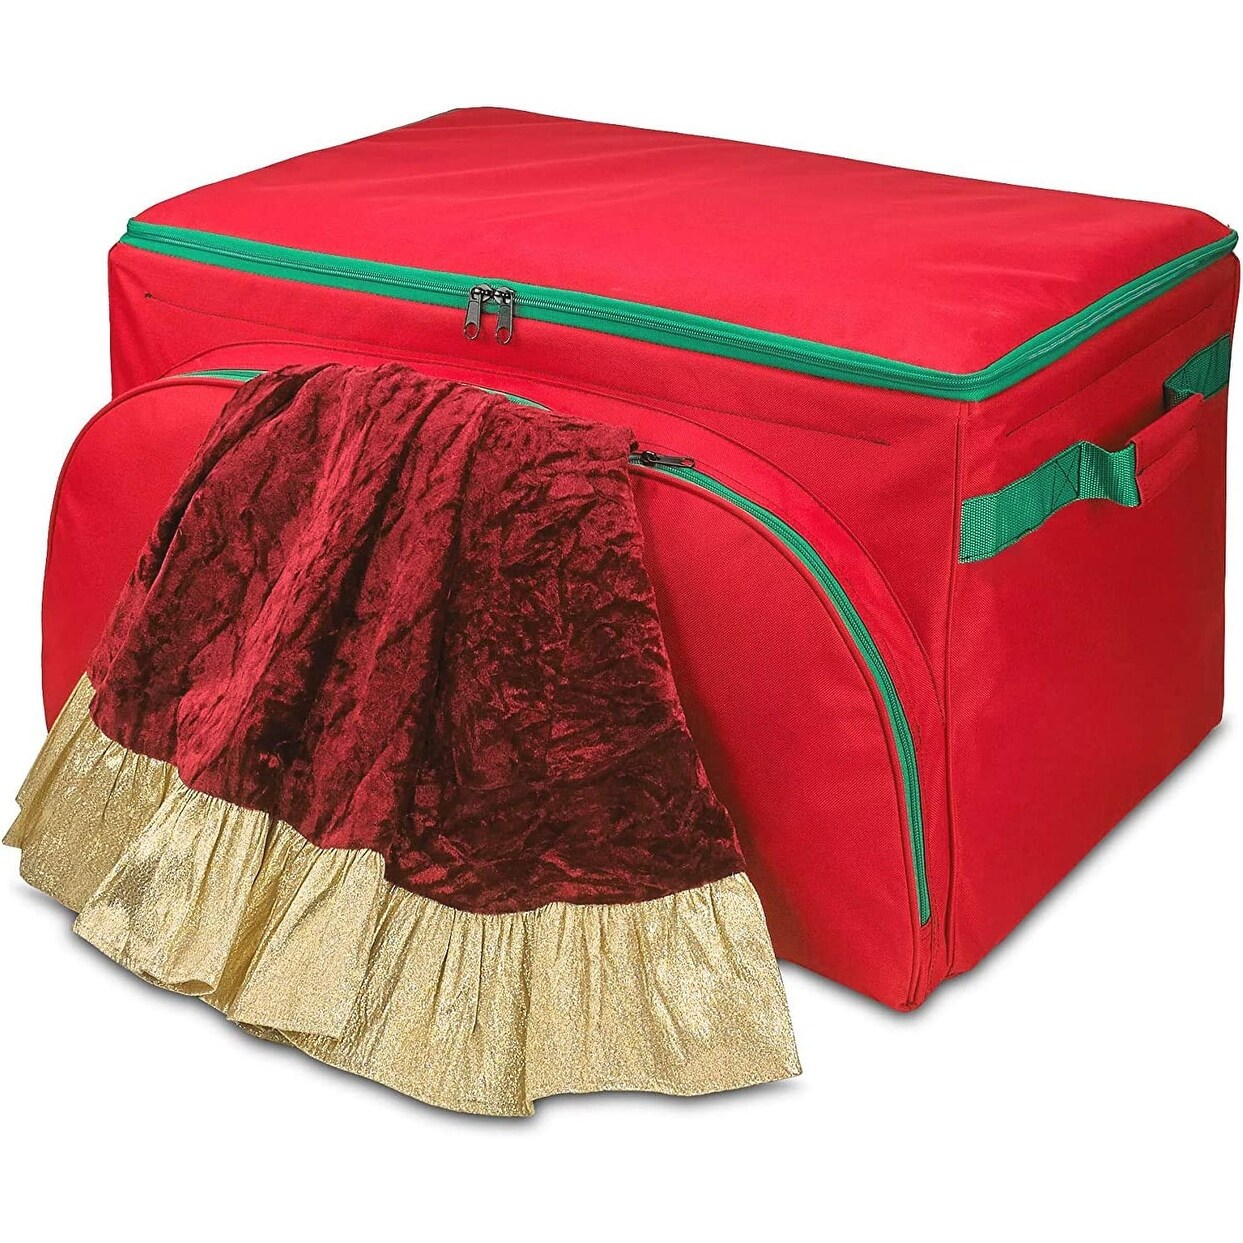 HOLDNundefined STORAGE Underbed Christmas Ornament Storage Container Box  with Dividers - On Sale - Bed Bath & Beyond - 36812656